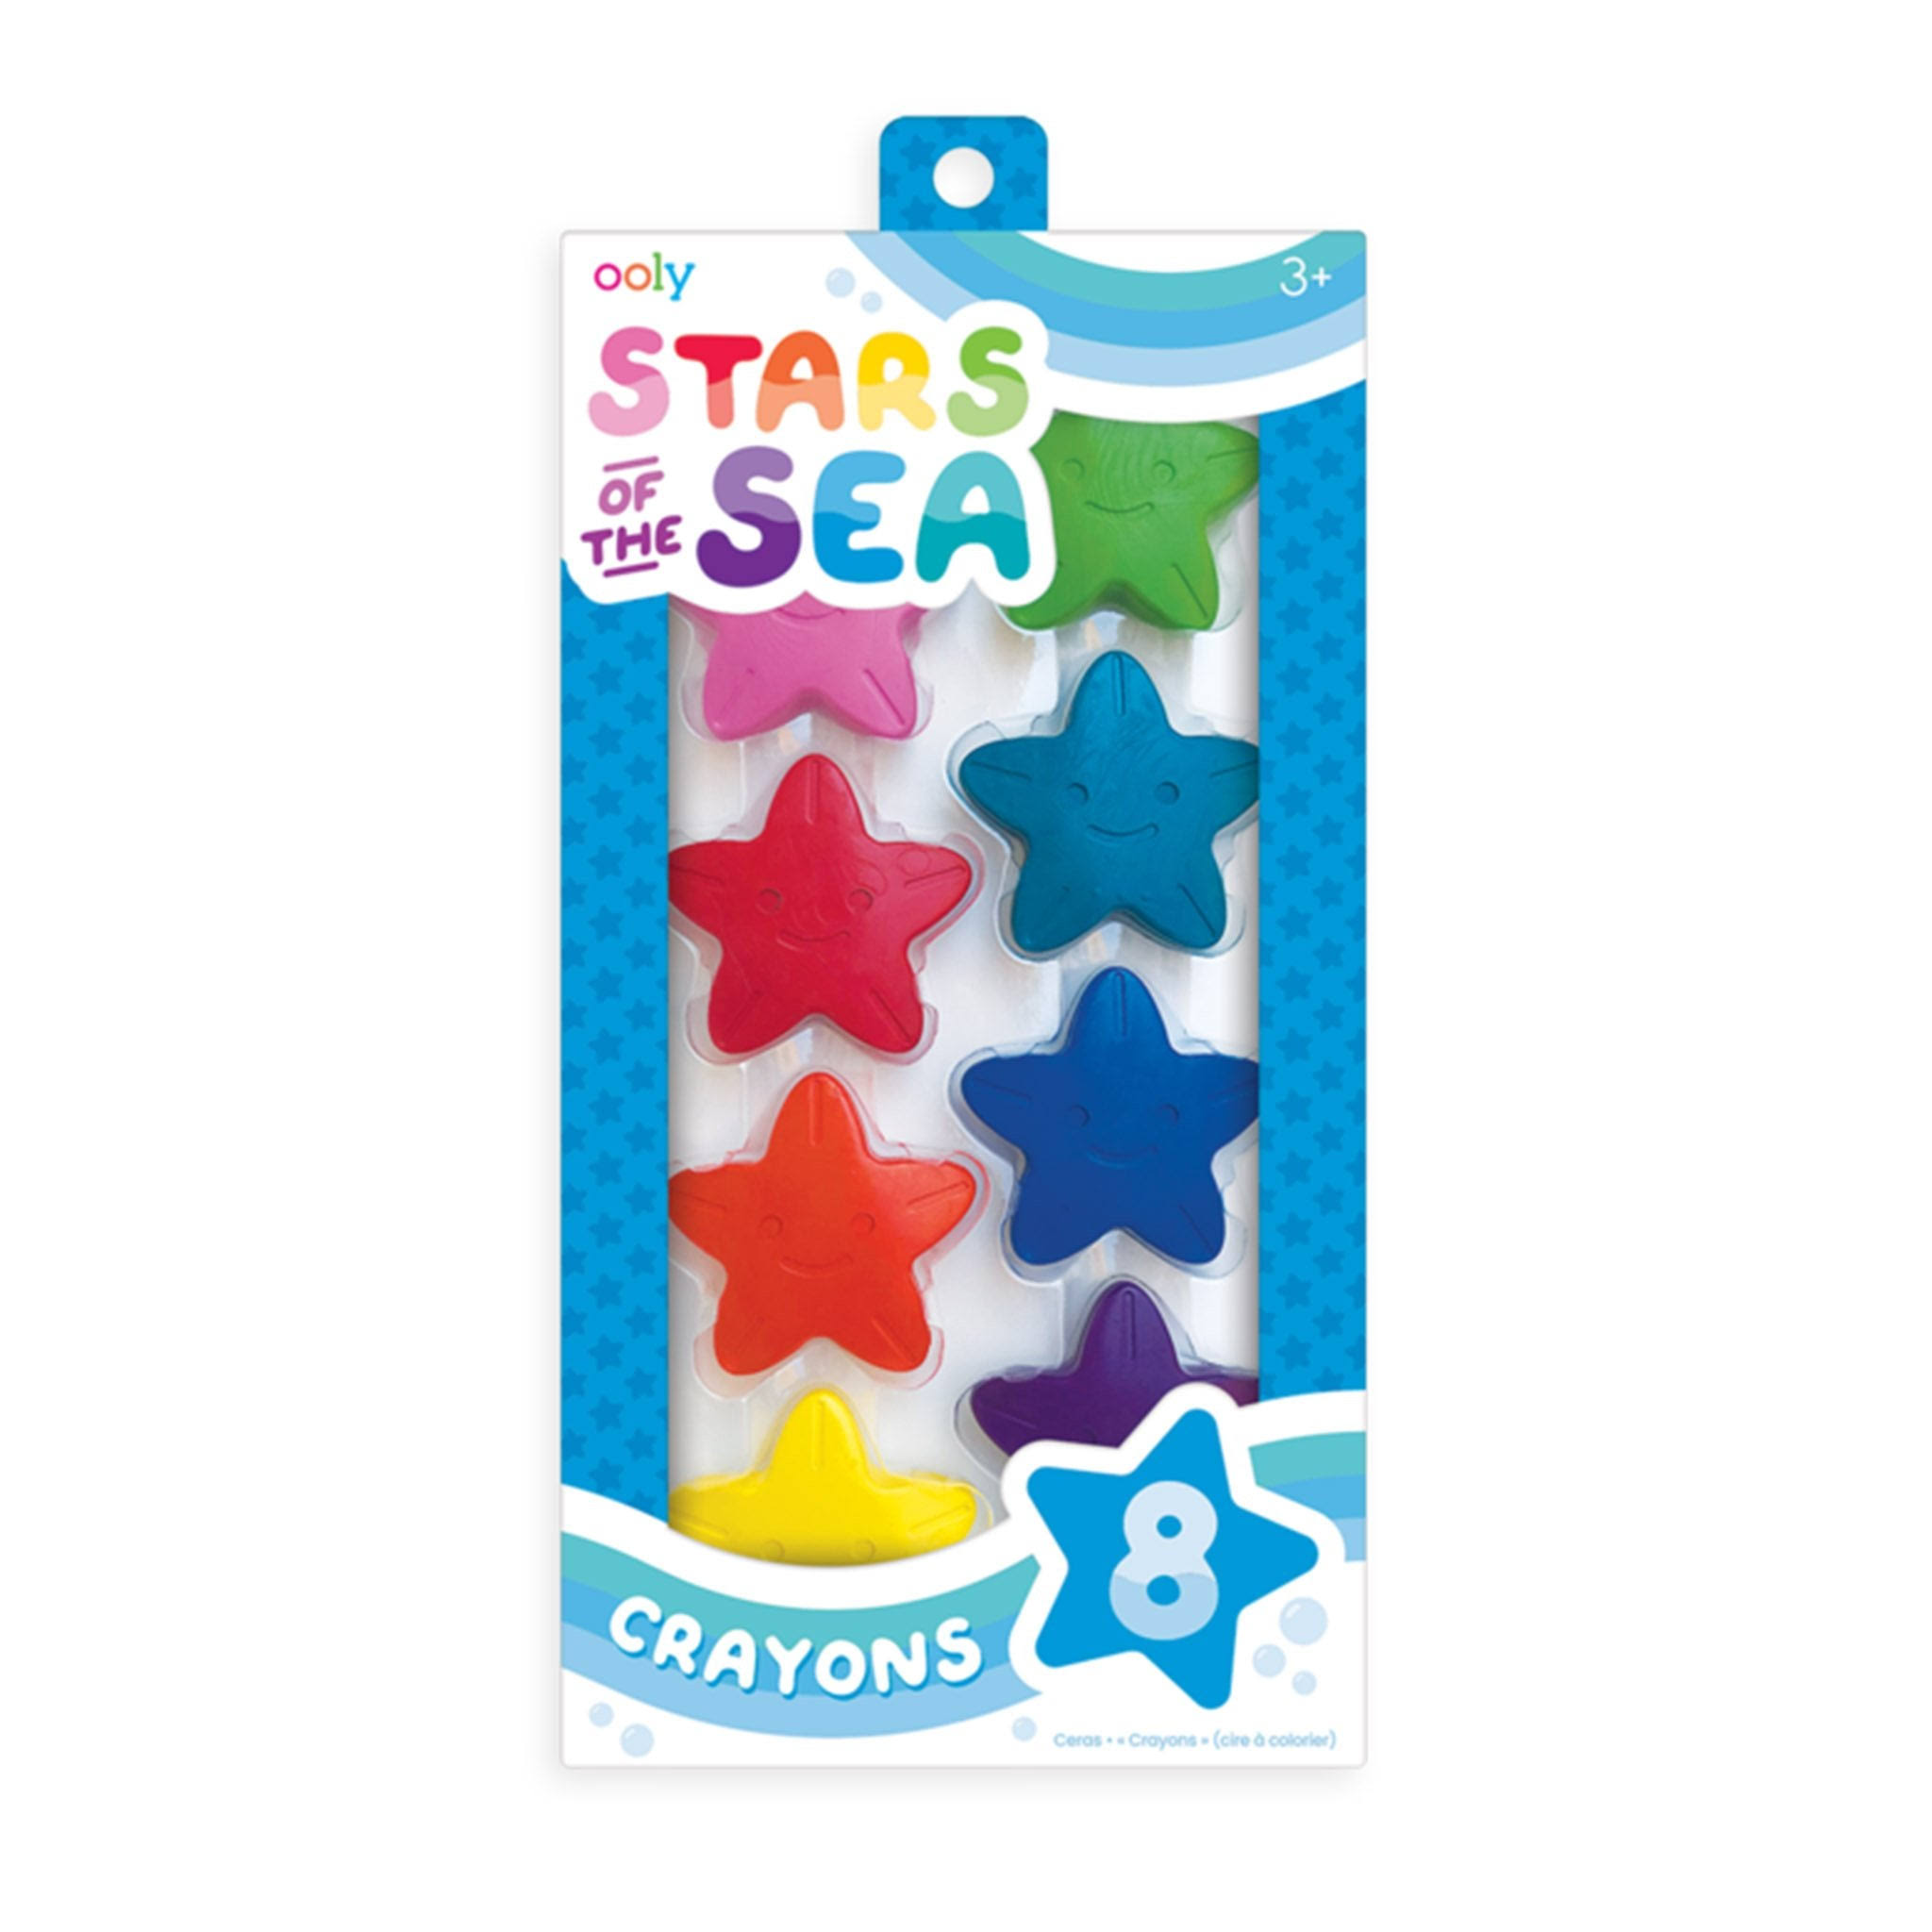 OOLY Stars of The Sea Crayons